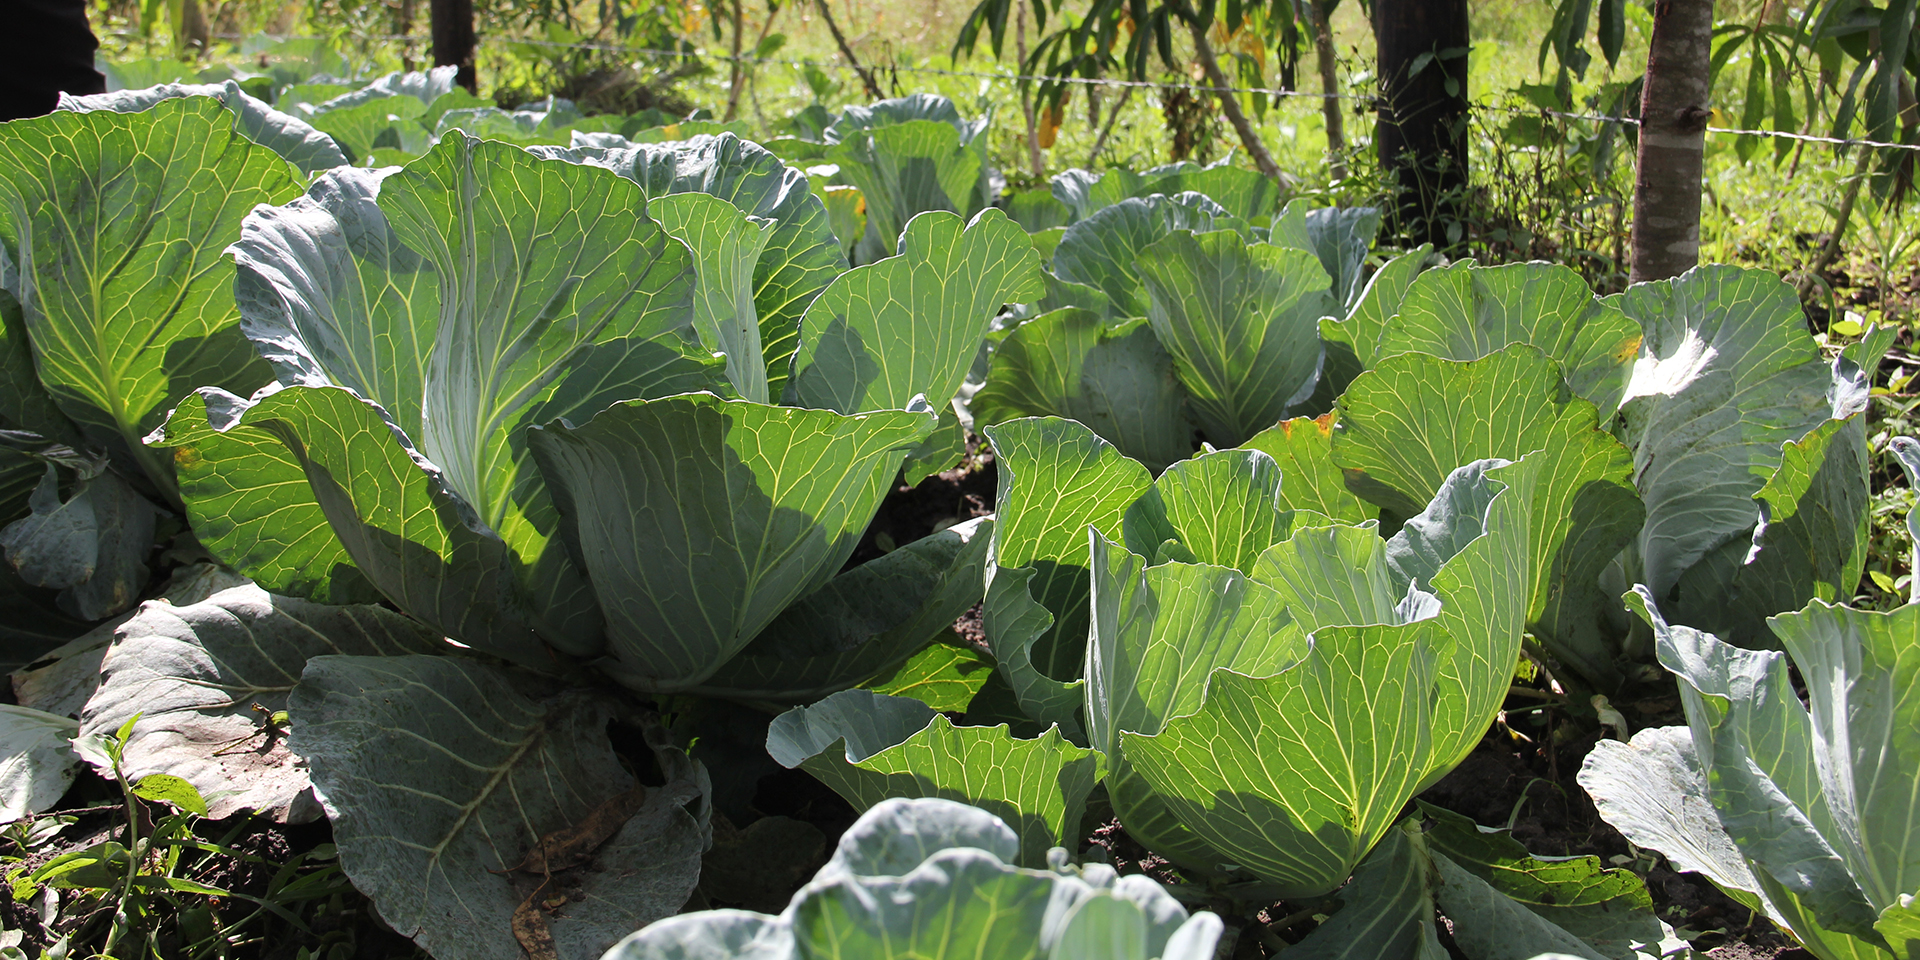 Several cabbages growing in a garden.